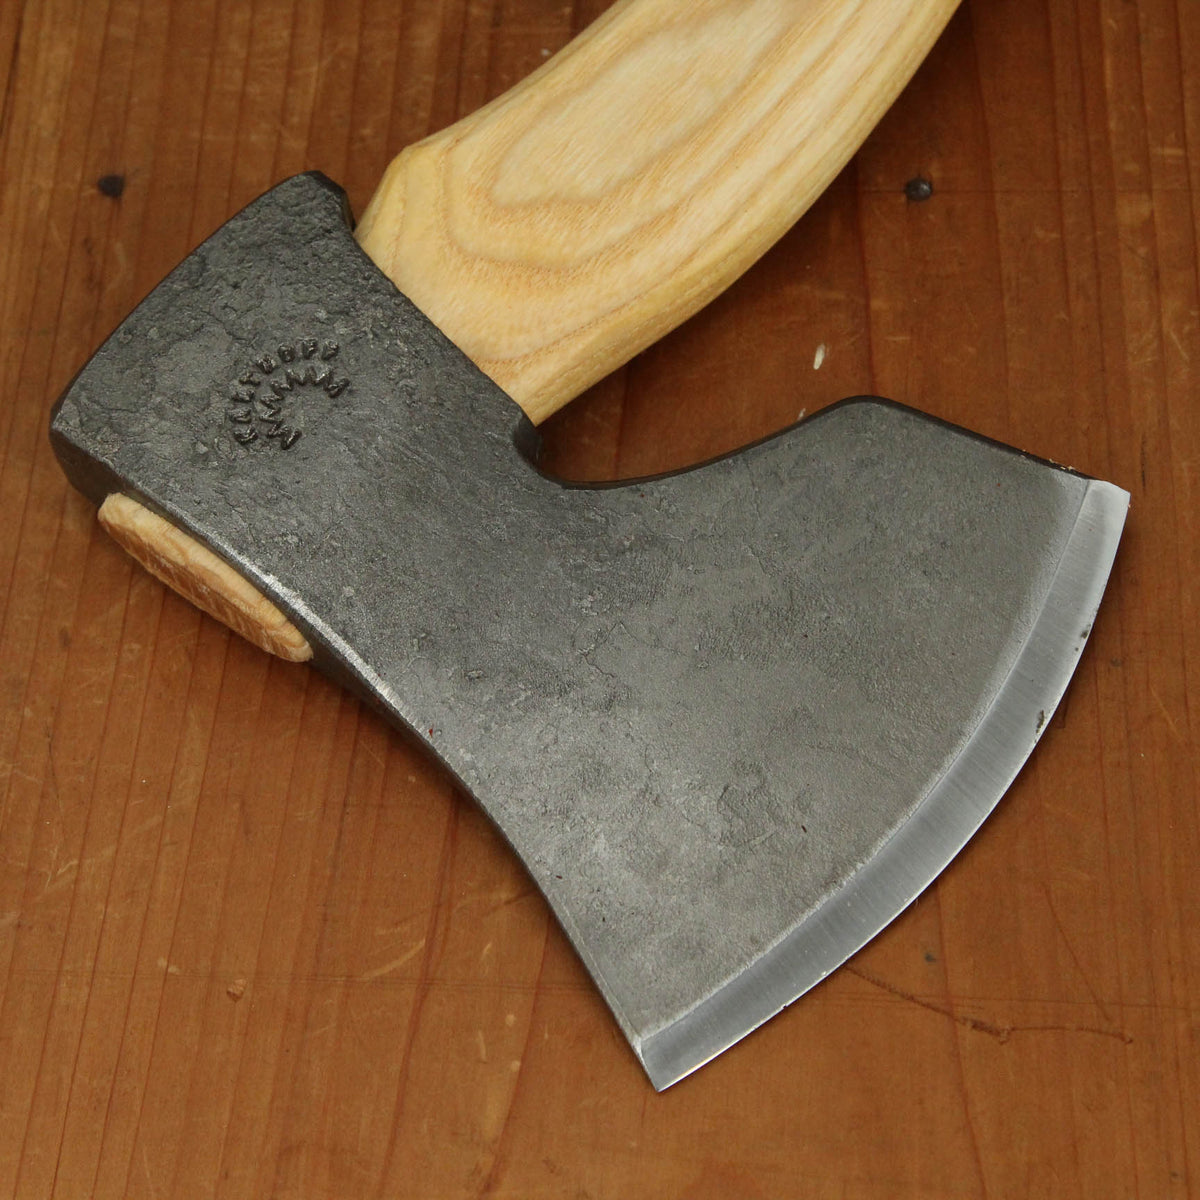 Small Carver Axe by Kalthoff Axes